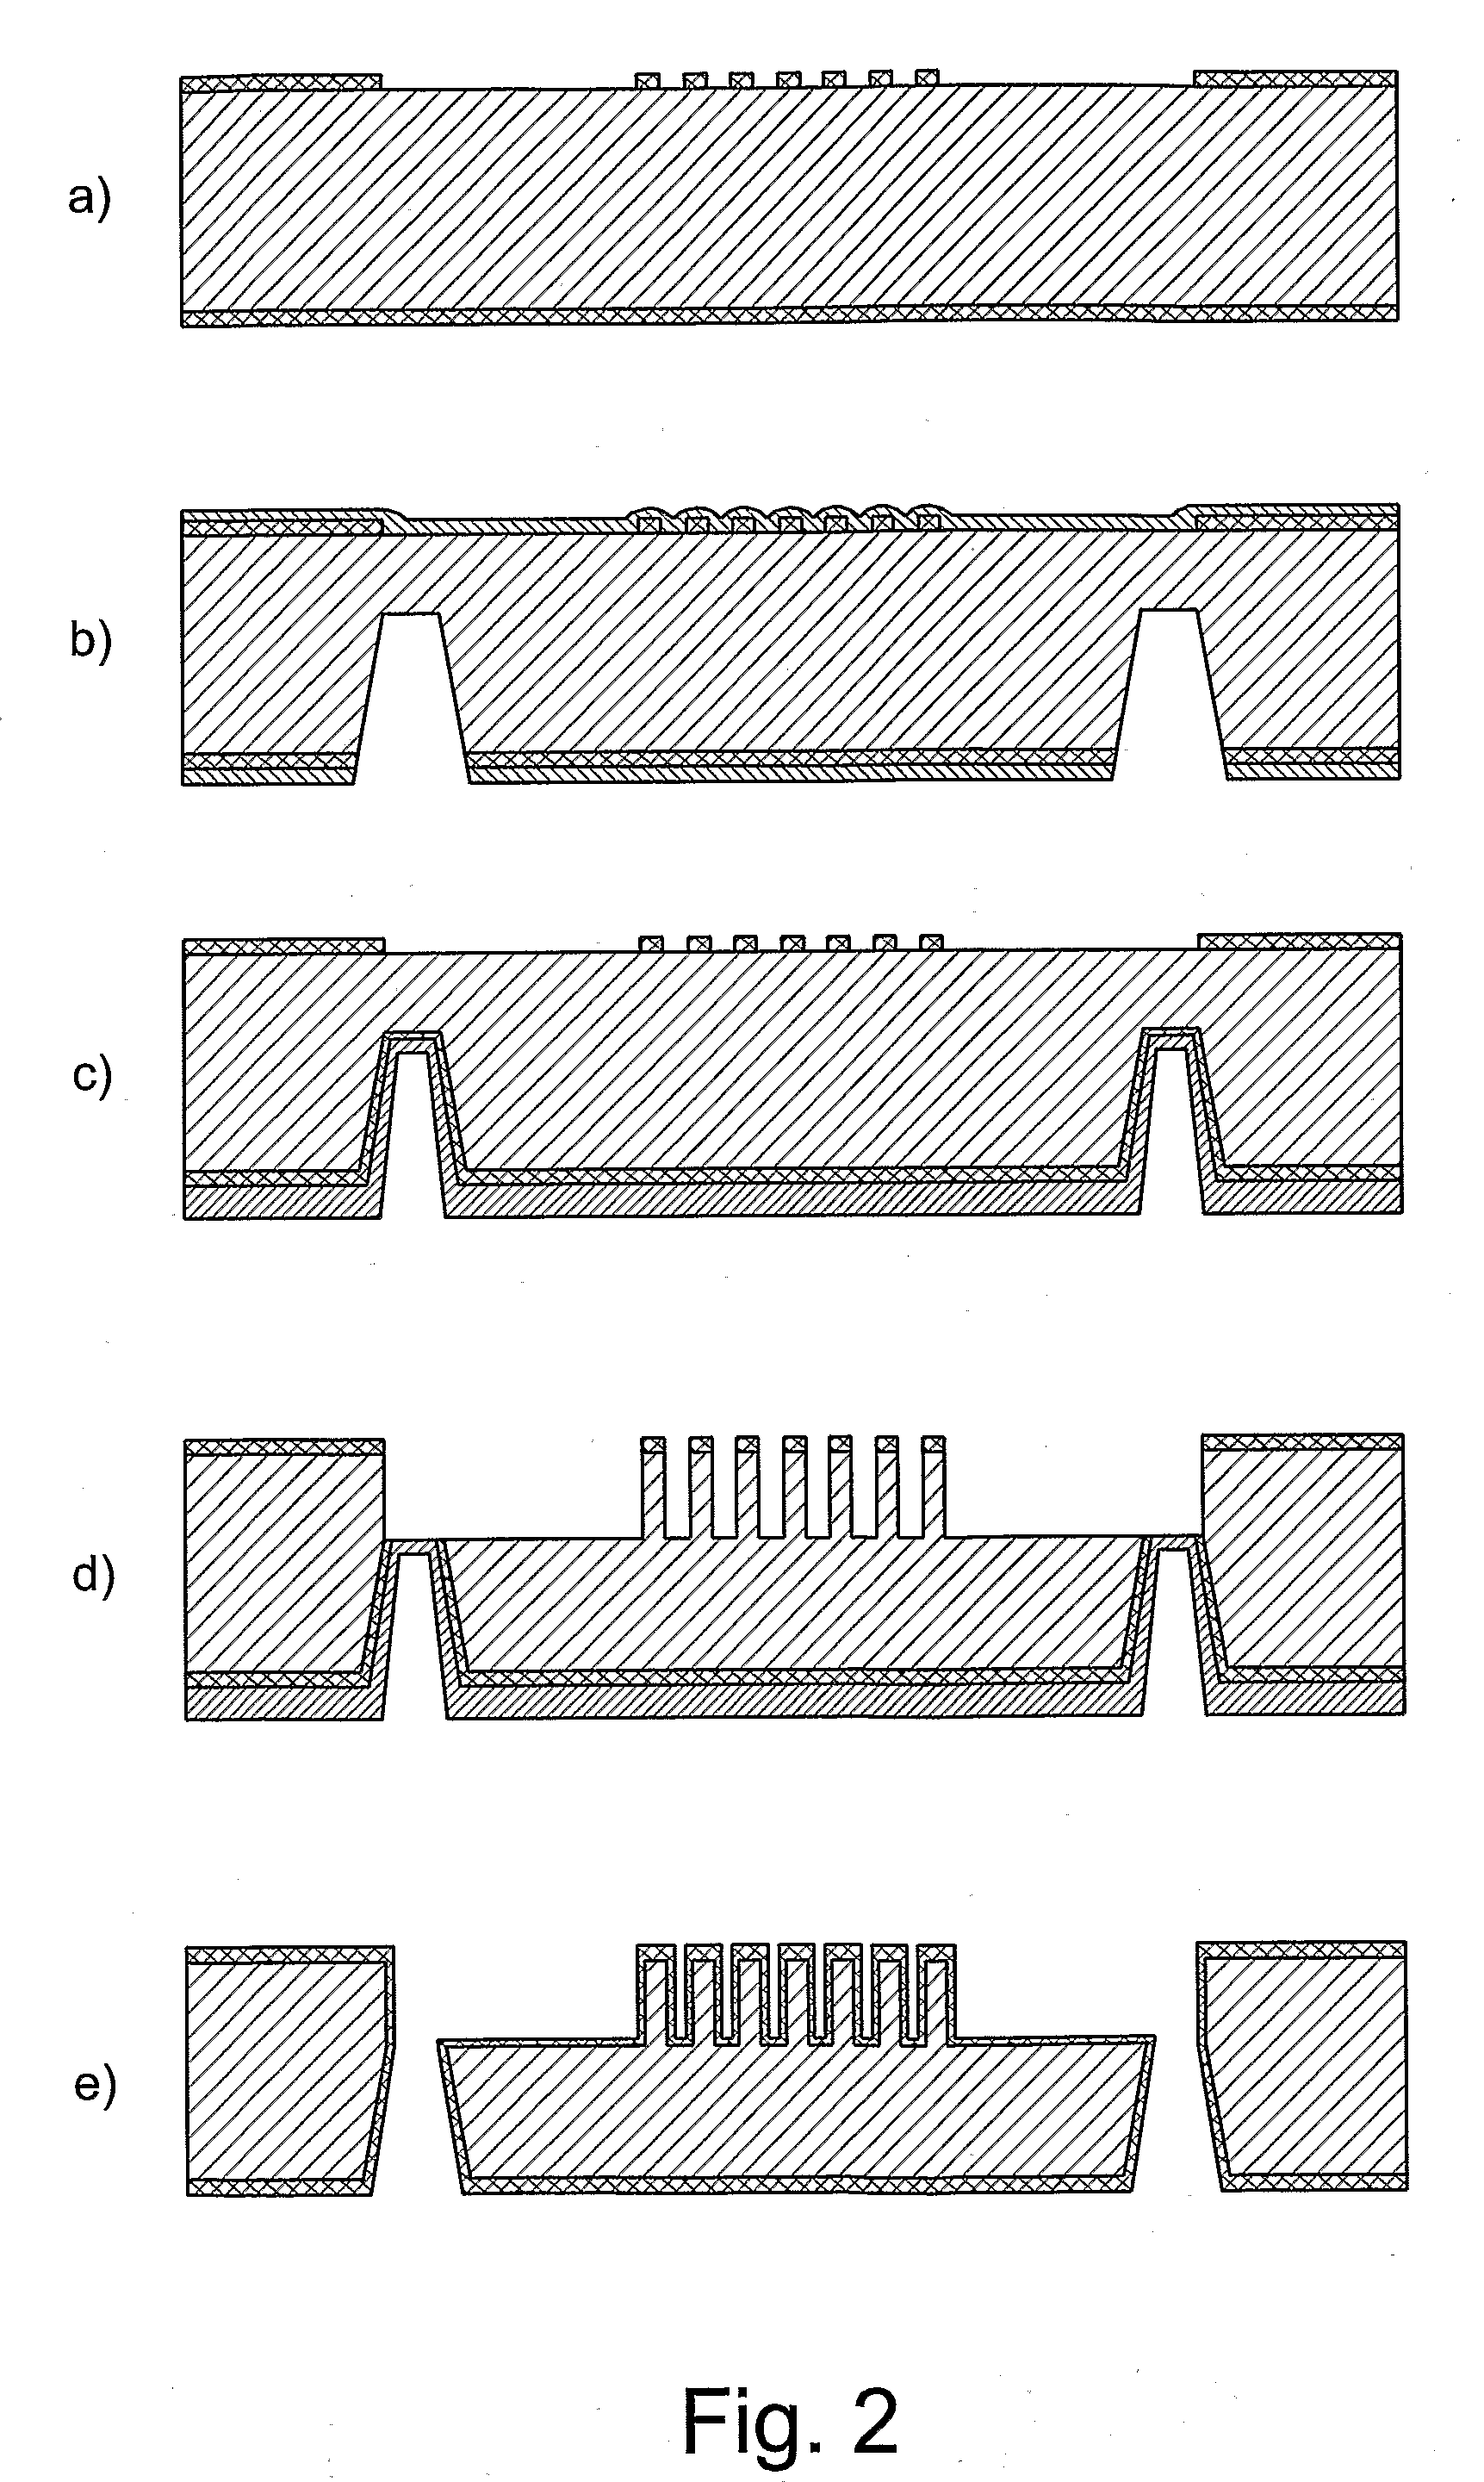 Fabrication of Inlet and Outlet Connections for Microfluidic Chips